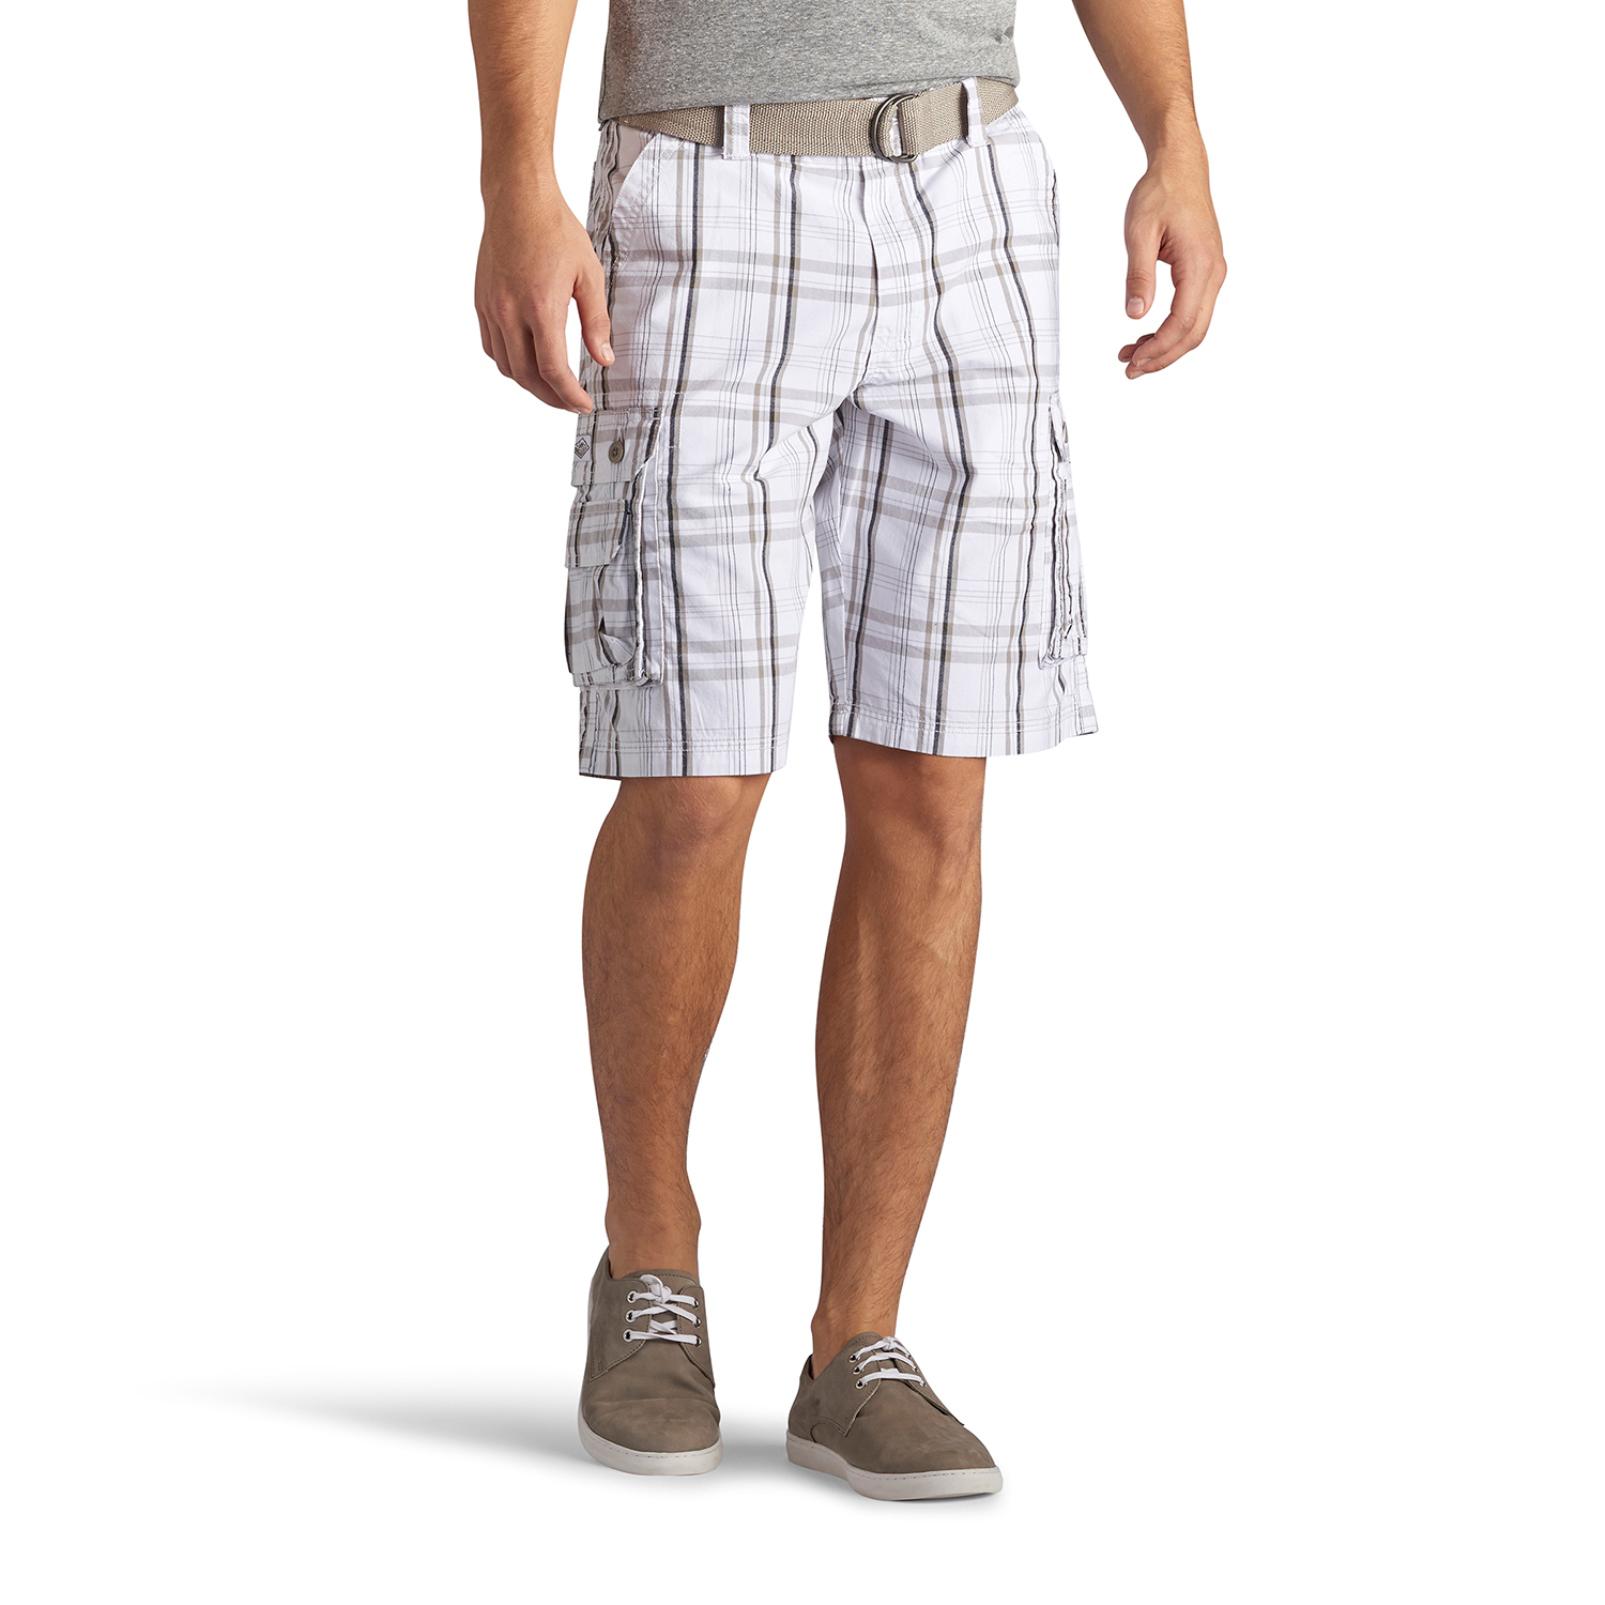 LEE Men's Wyoming Belted Cargo Shorts - Plaid